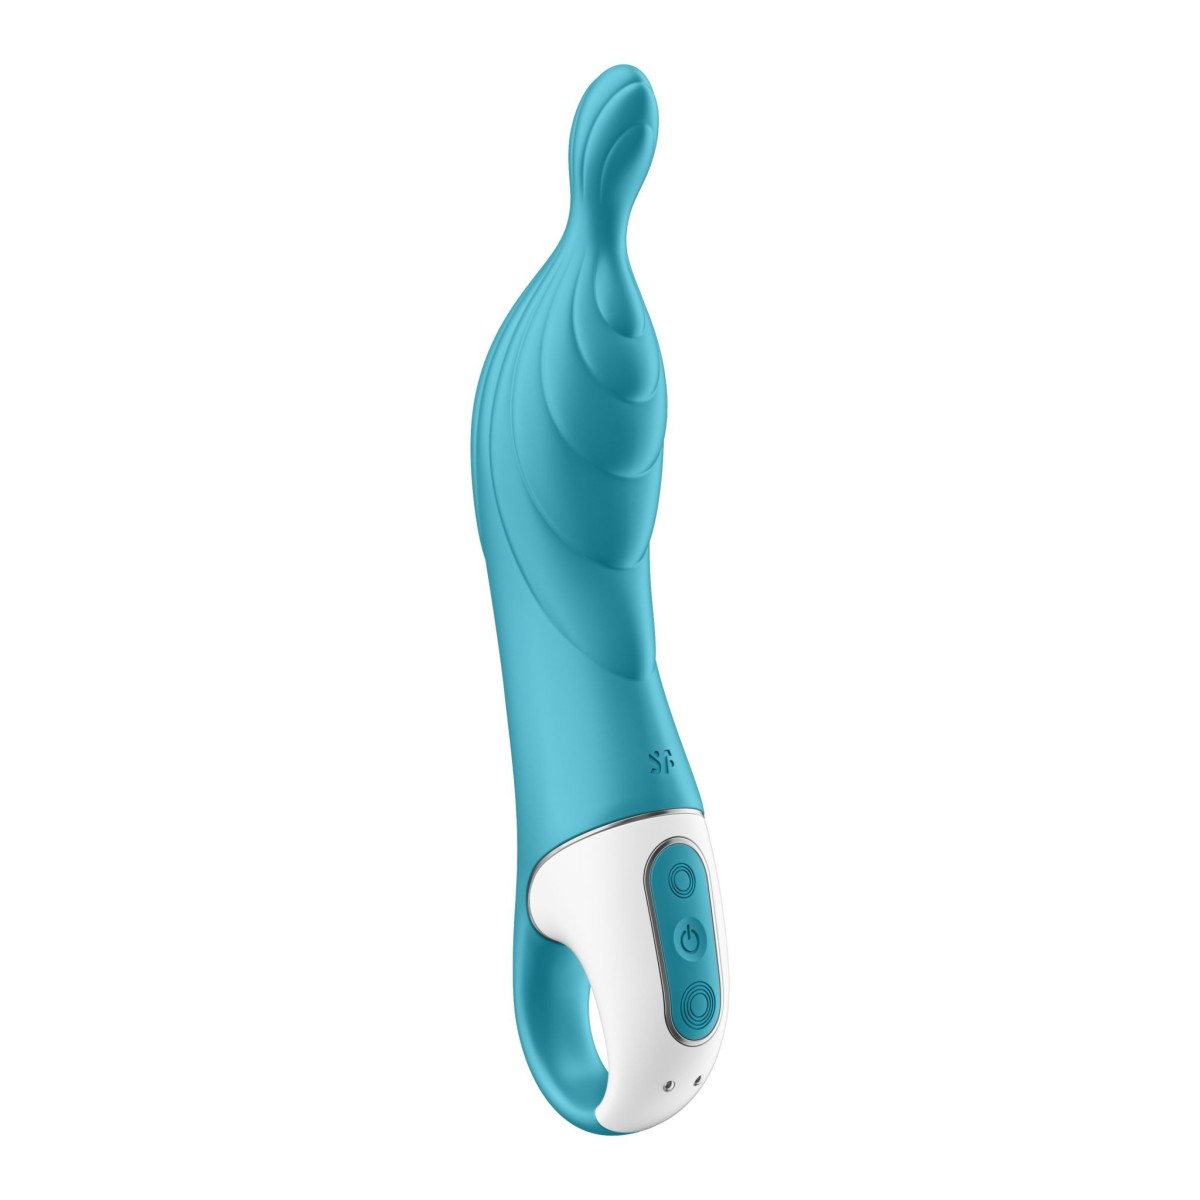 Vibrátor Satisfyer A-Mazing 2 Turquoise